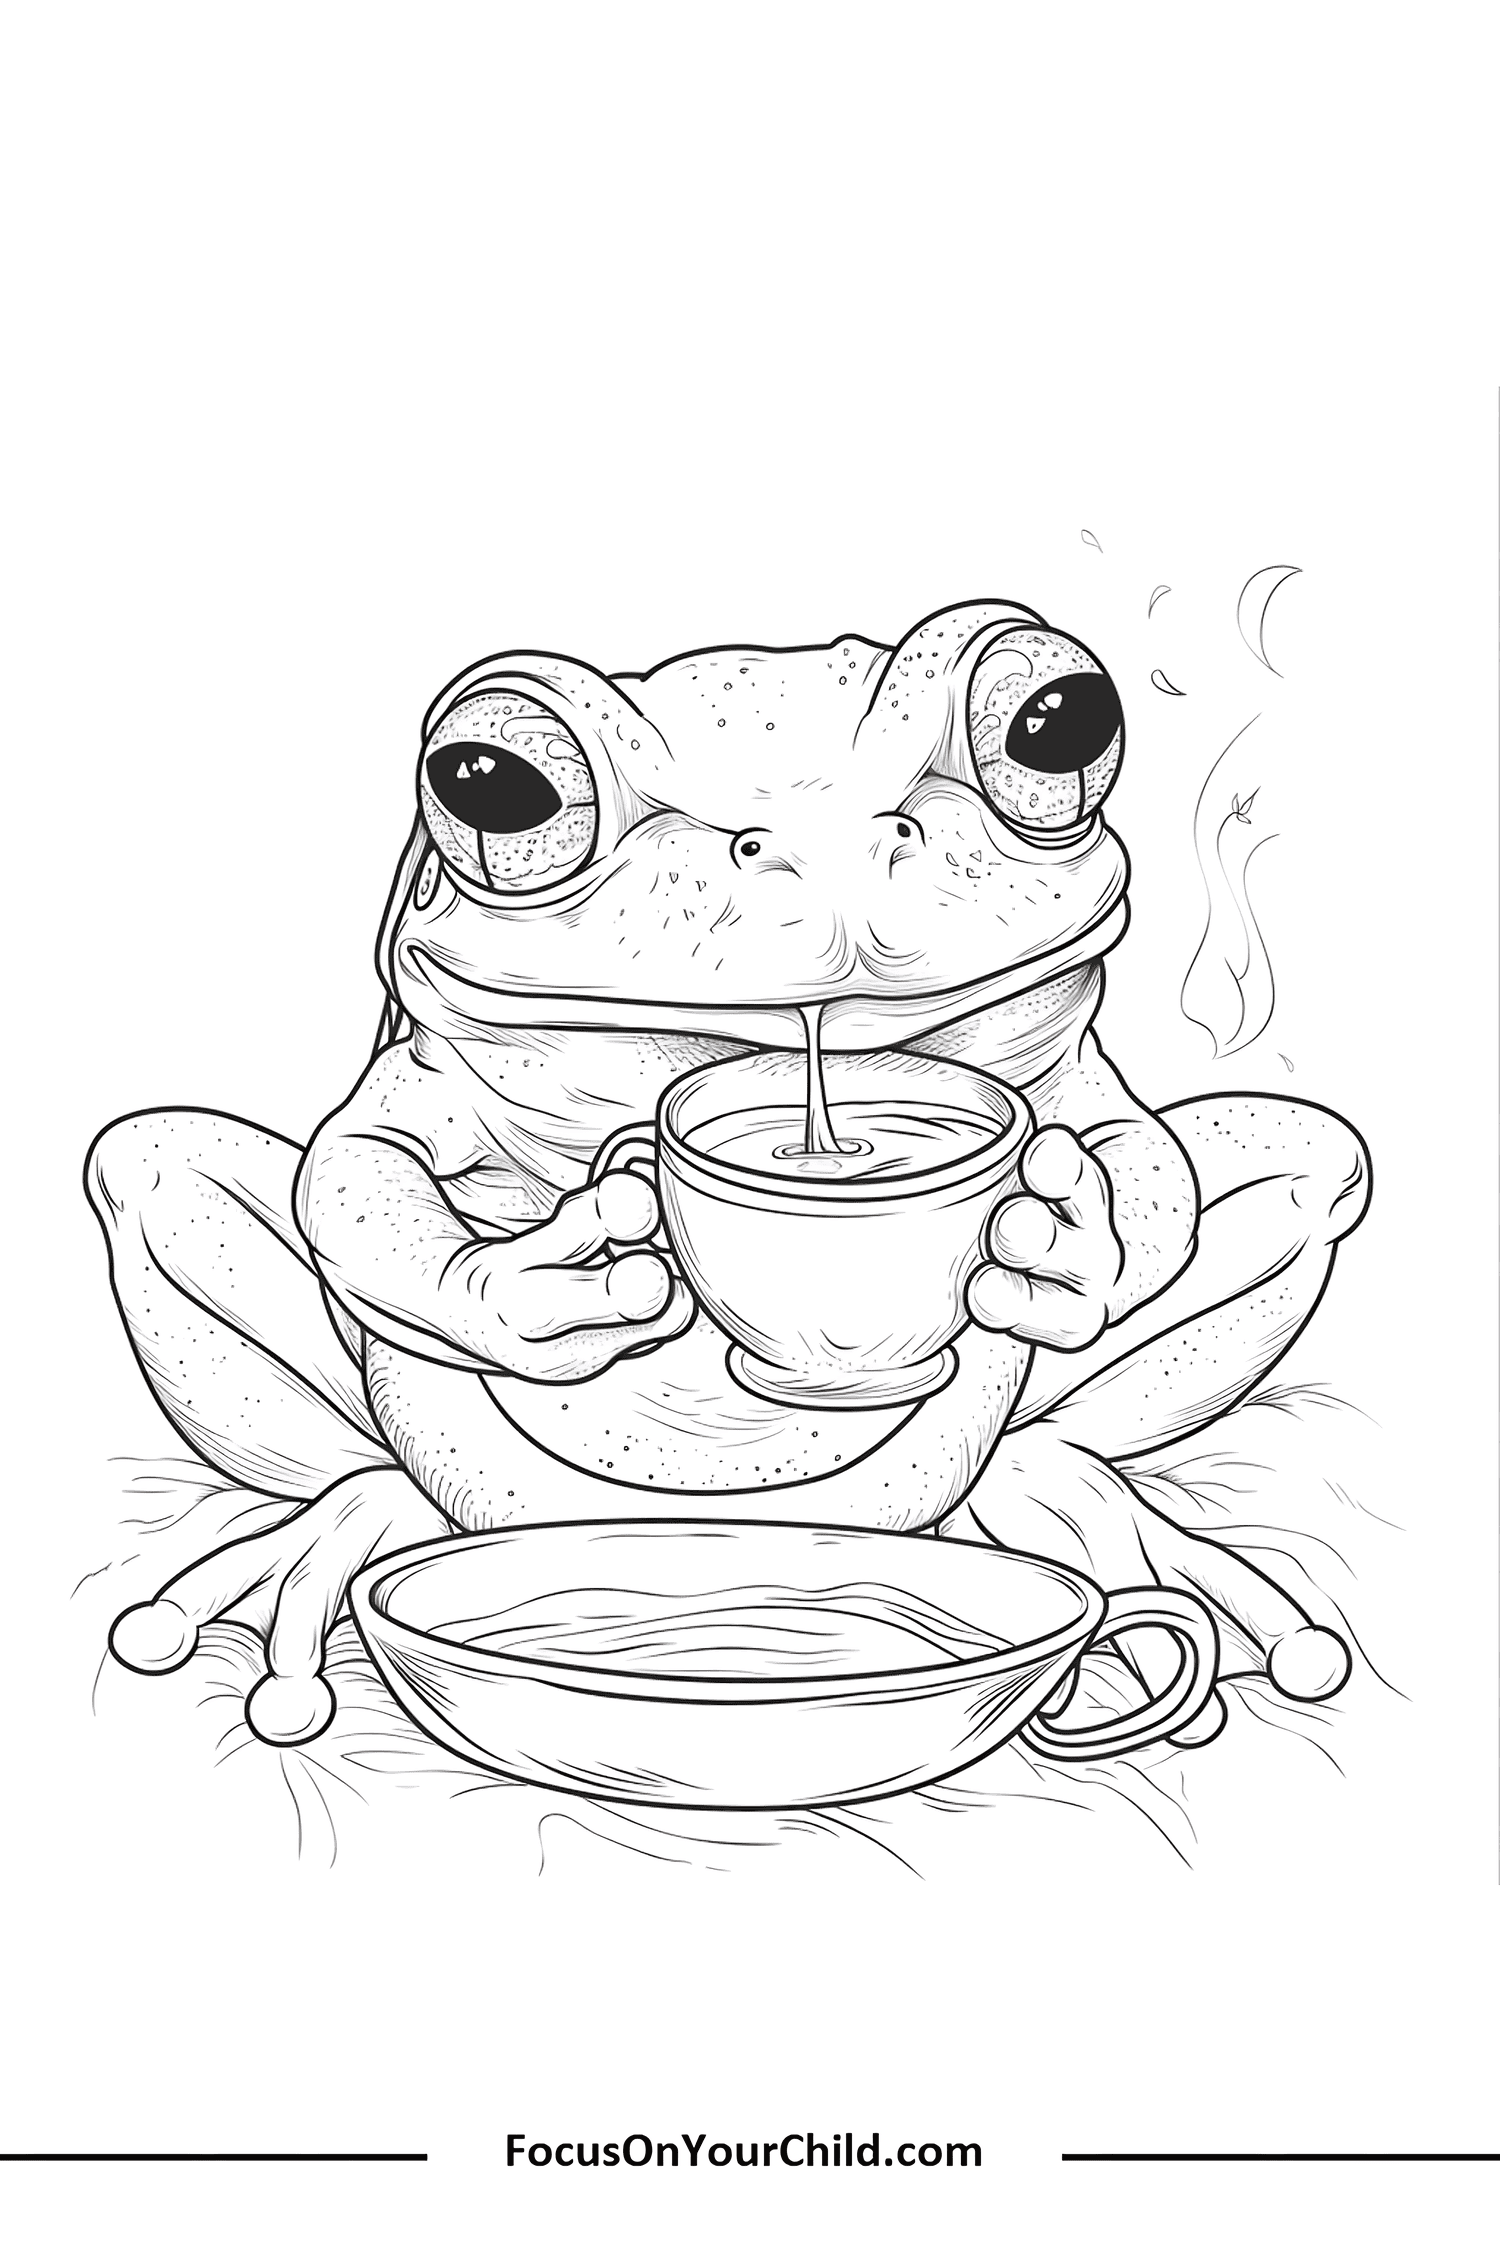 Whimsical frog enjoying a hot beverage in detailed black-and-white line drawing.